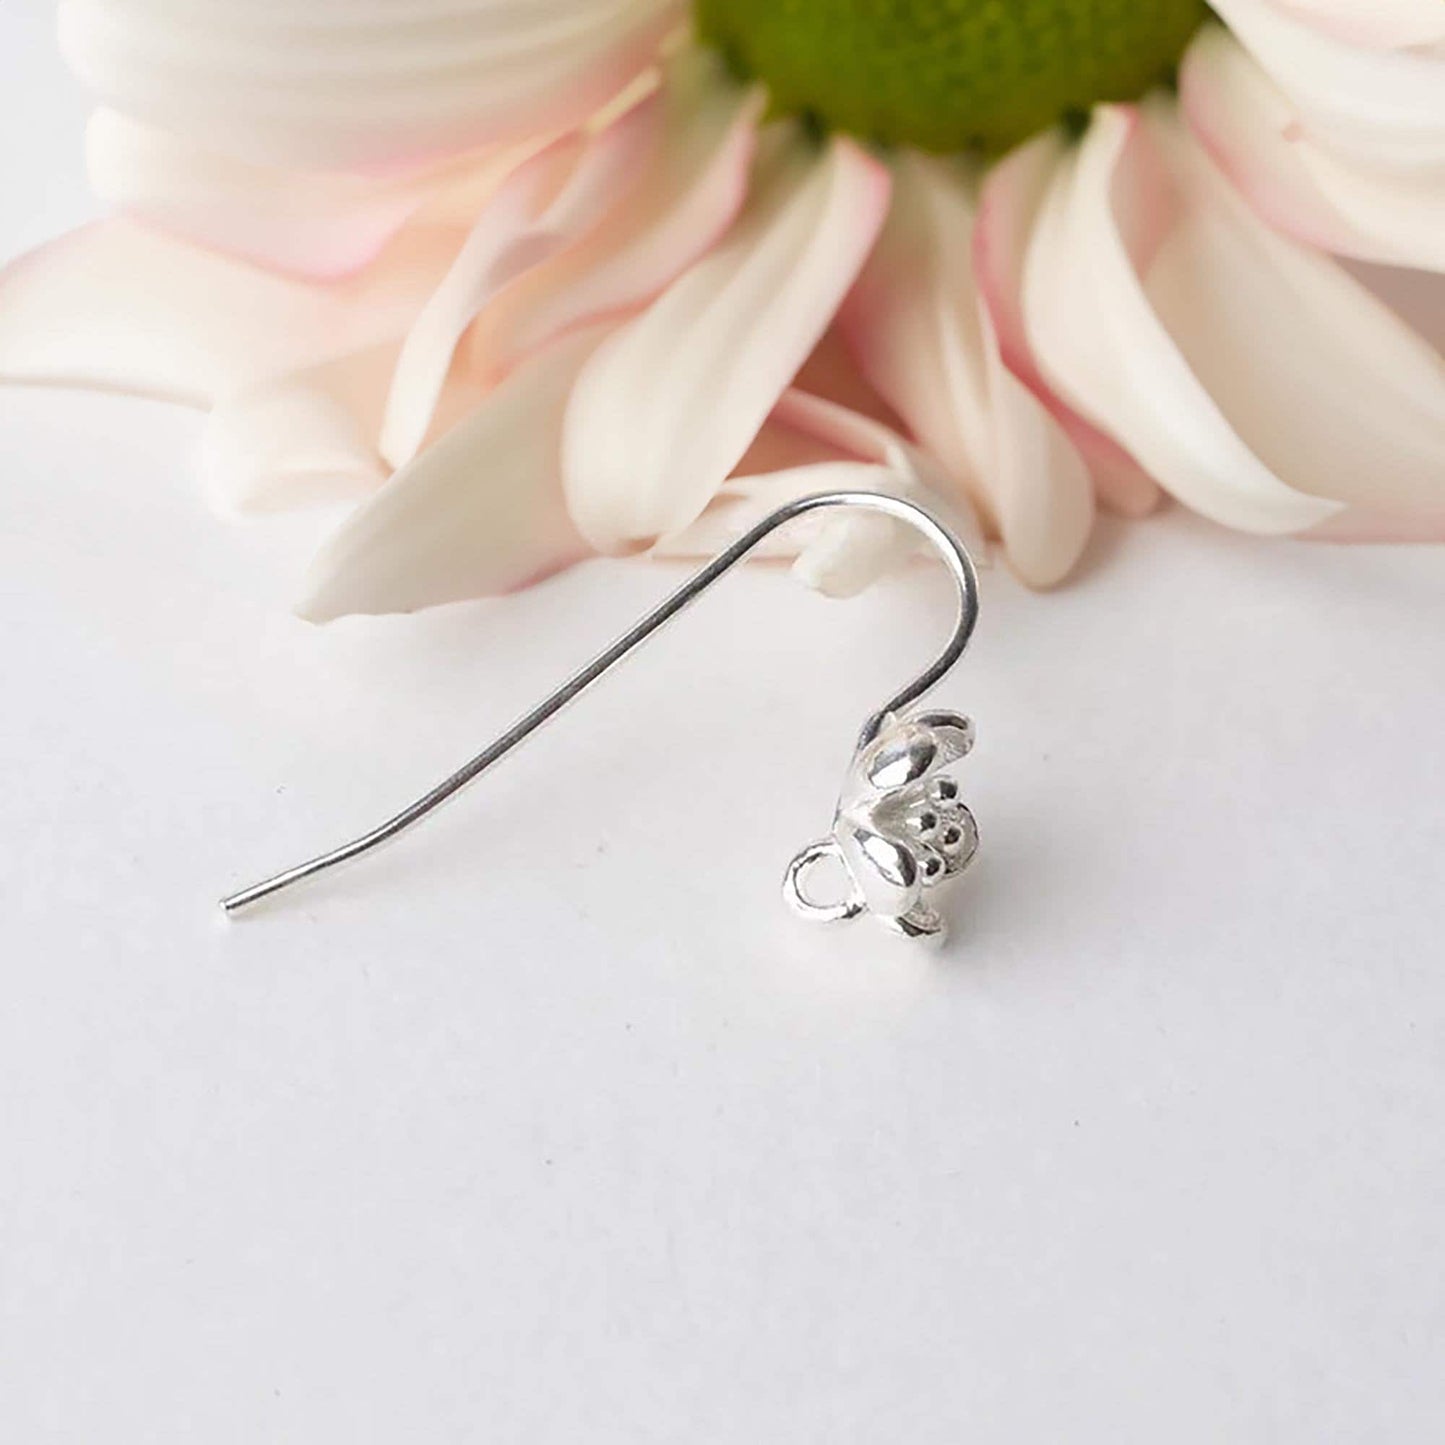 Flower Shaped Earring Hooks 925 Sterling Silver Earring Wires DIY Gift for Her Jewelry Making Supplies Ear Wires Connector Components